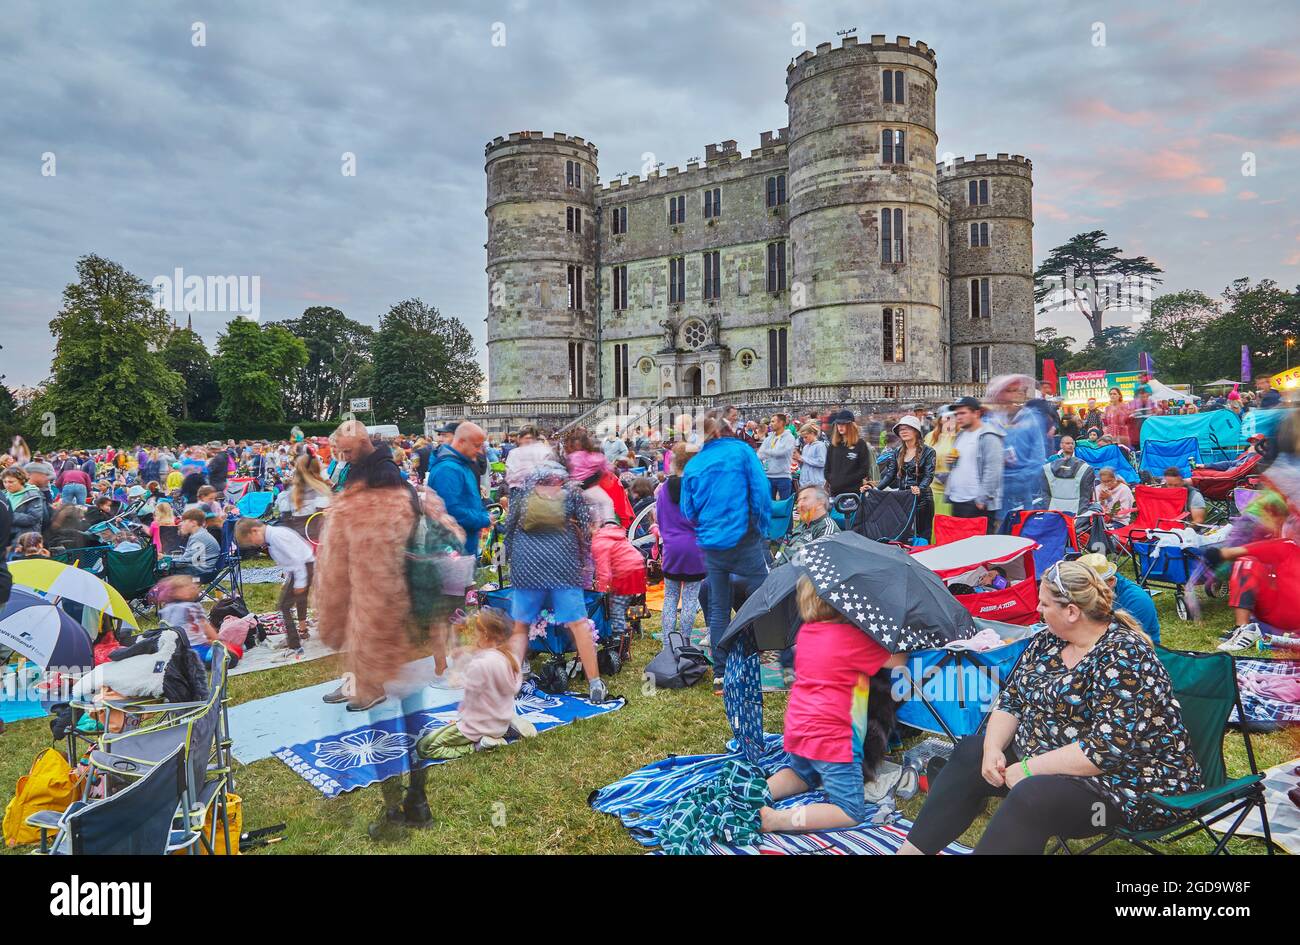 Members of a music festival audience in front of Lulworth Castle, at Camp Bestival, Lulworth, Dorset, Great Britain. Stock Photo